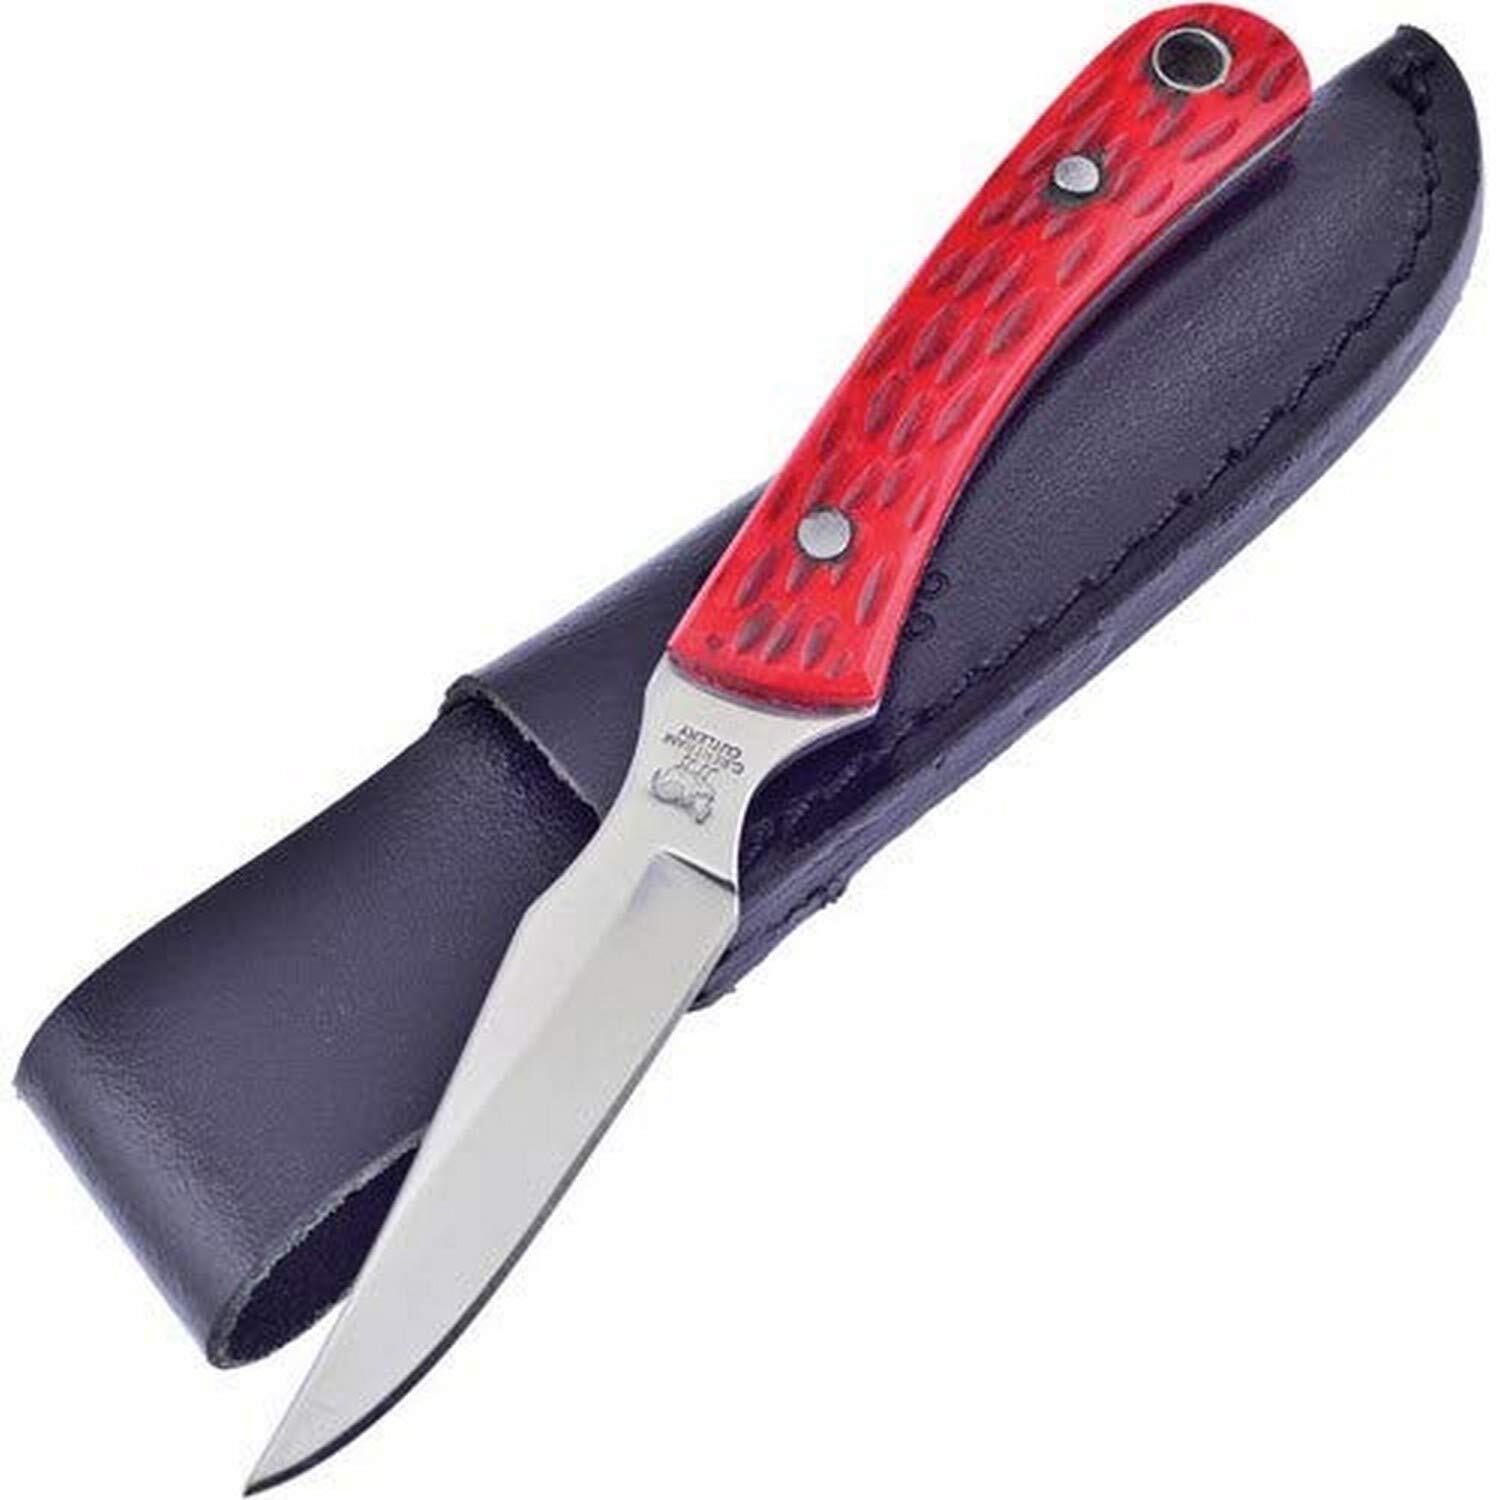 New Hen & Rooster Caper Red Pick Bone Fixed Blade Knife HR-5025RPB